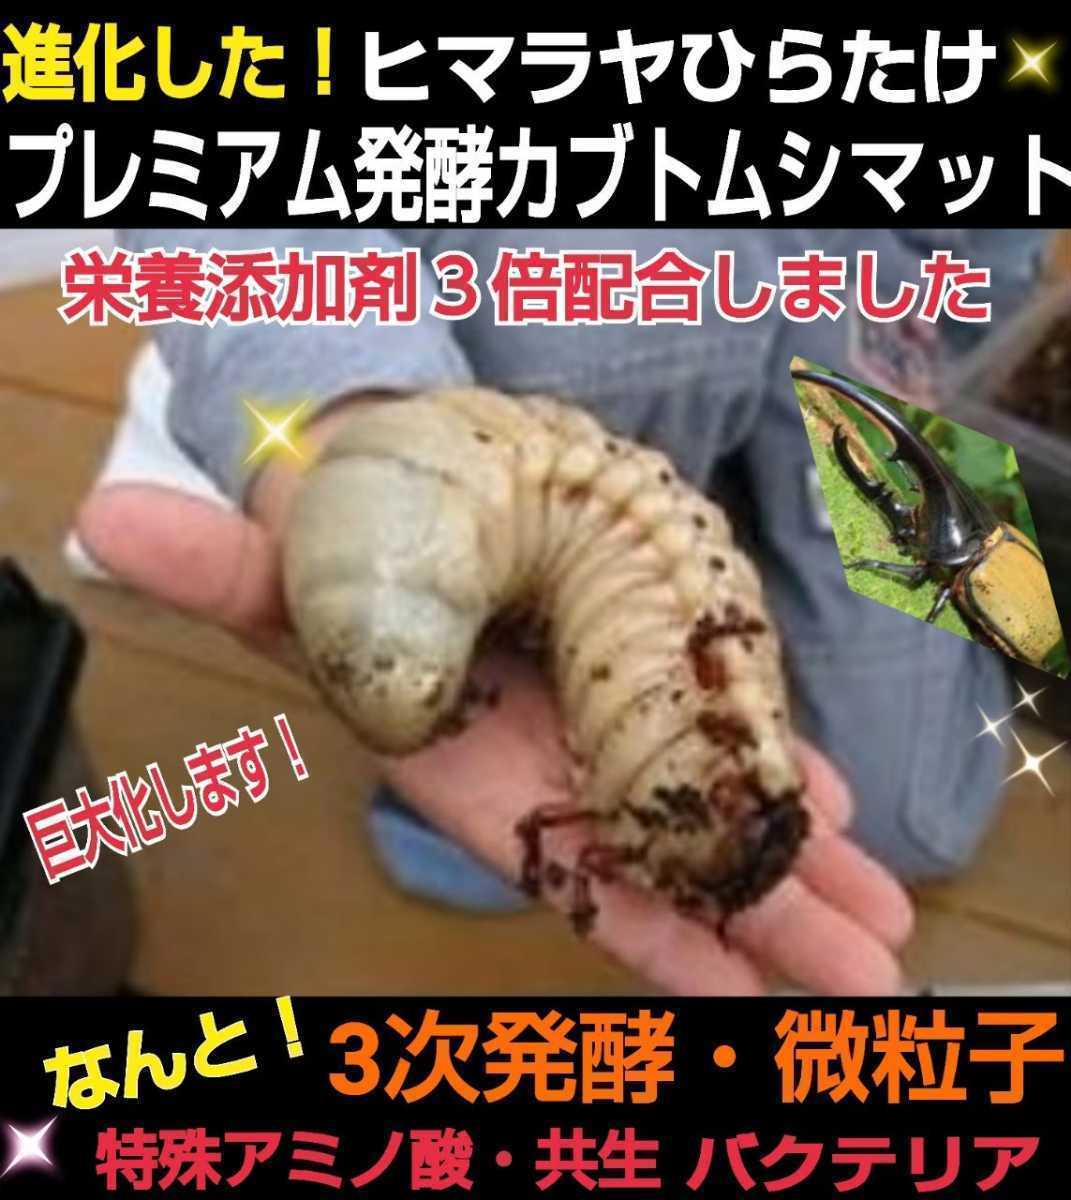  extra-large case attaching * premium departure . mat 20L entering * rhinoceros beetle larva . inserting only * convenience! large imago feather . is possible to do *kobae prevention special filter attaching 